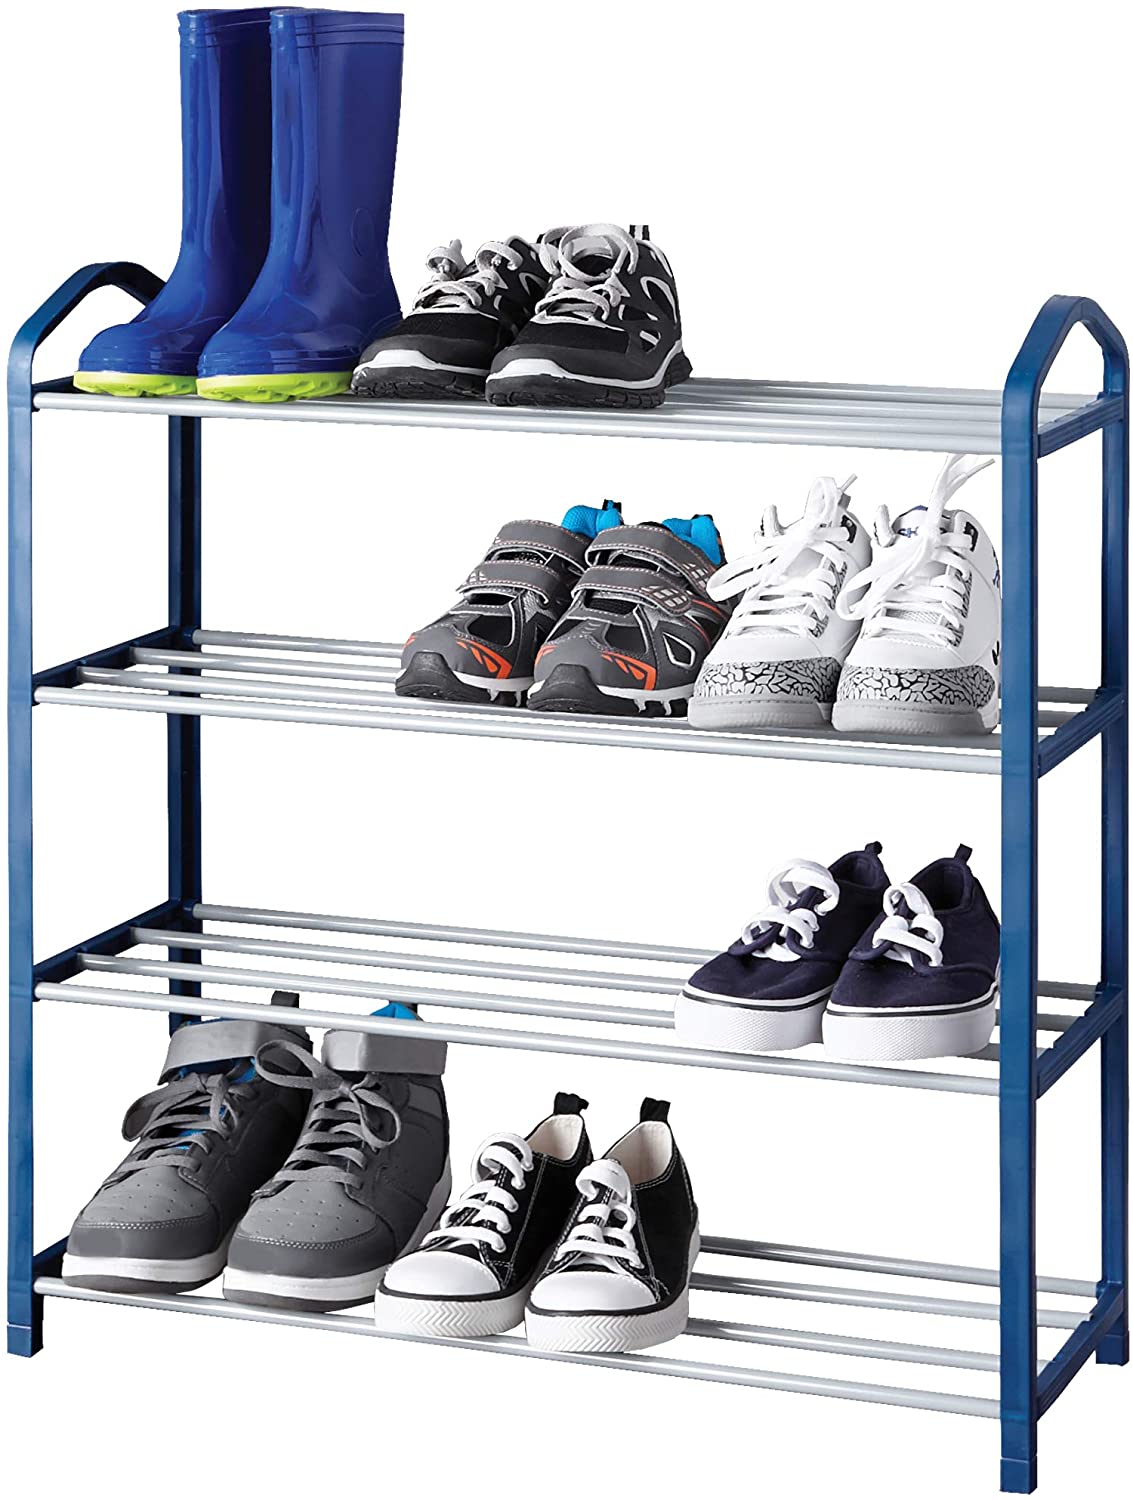 Mainstays 4-Tier Shoe Rack, White with Steel Shelves 